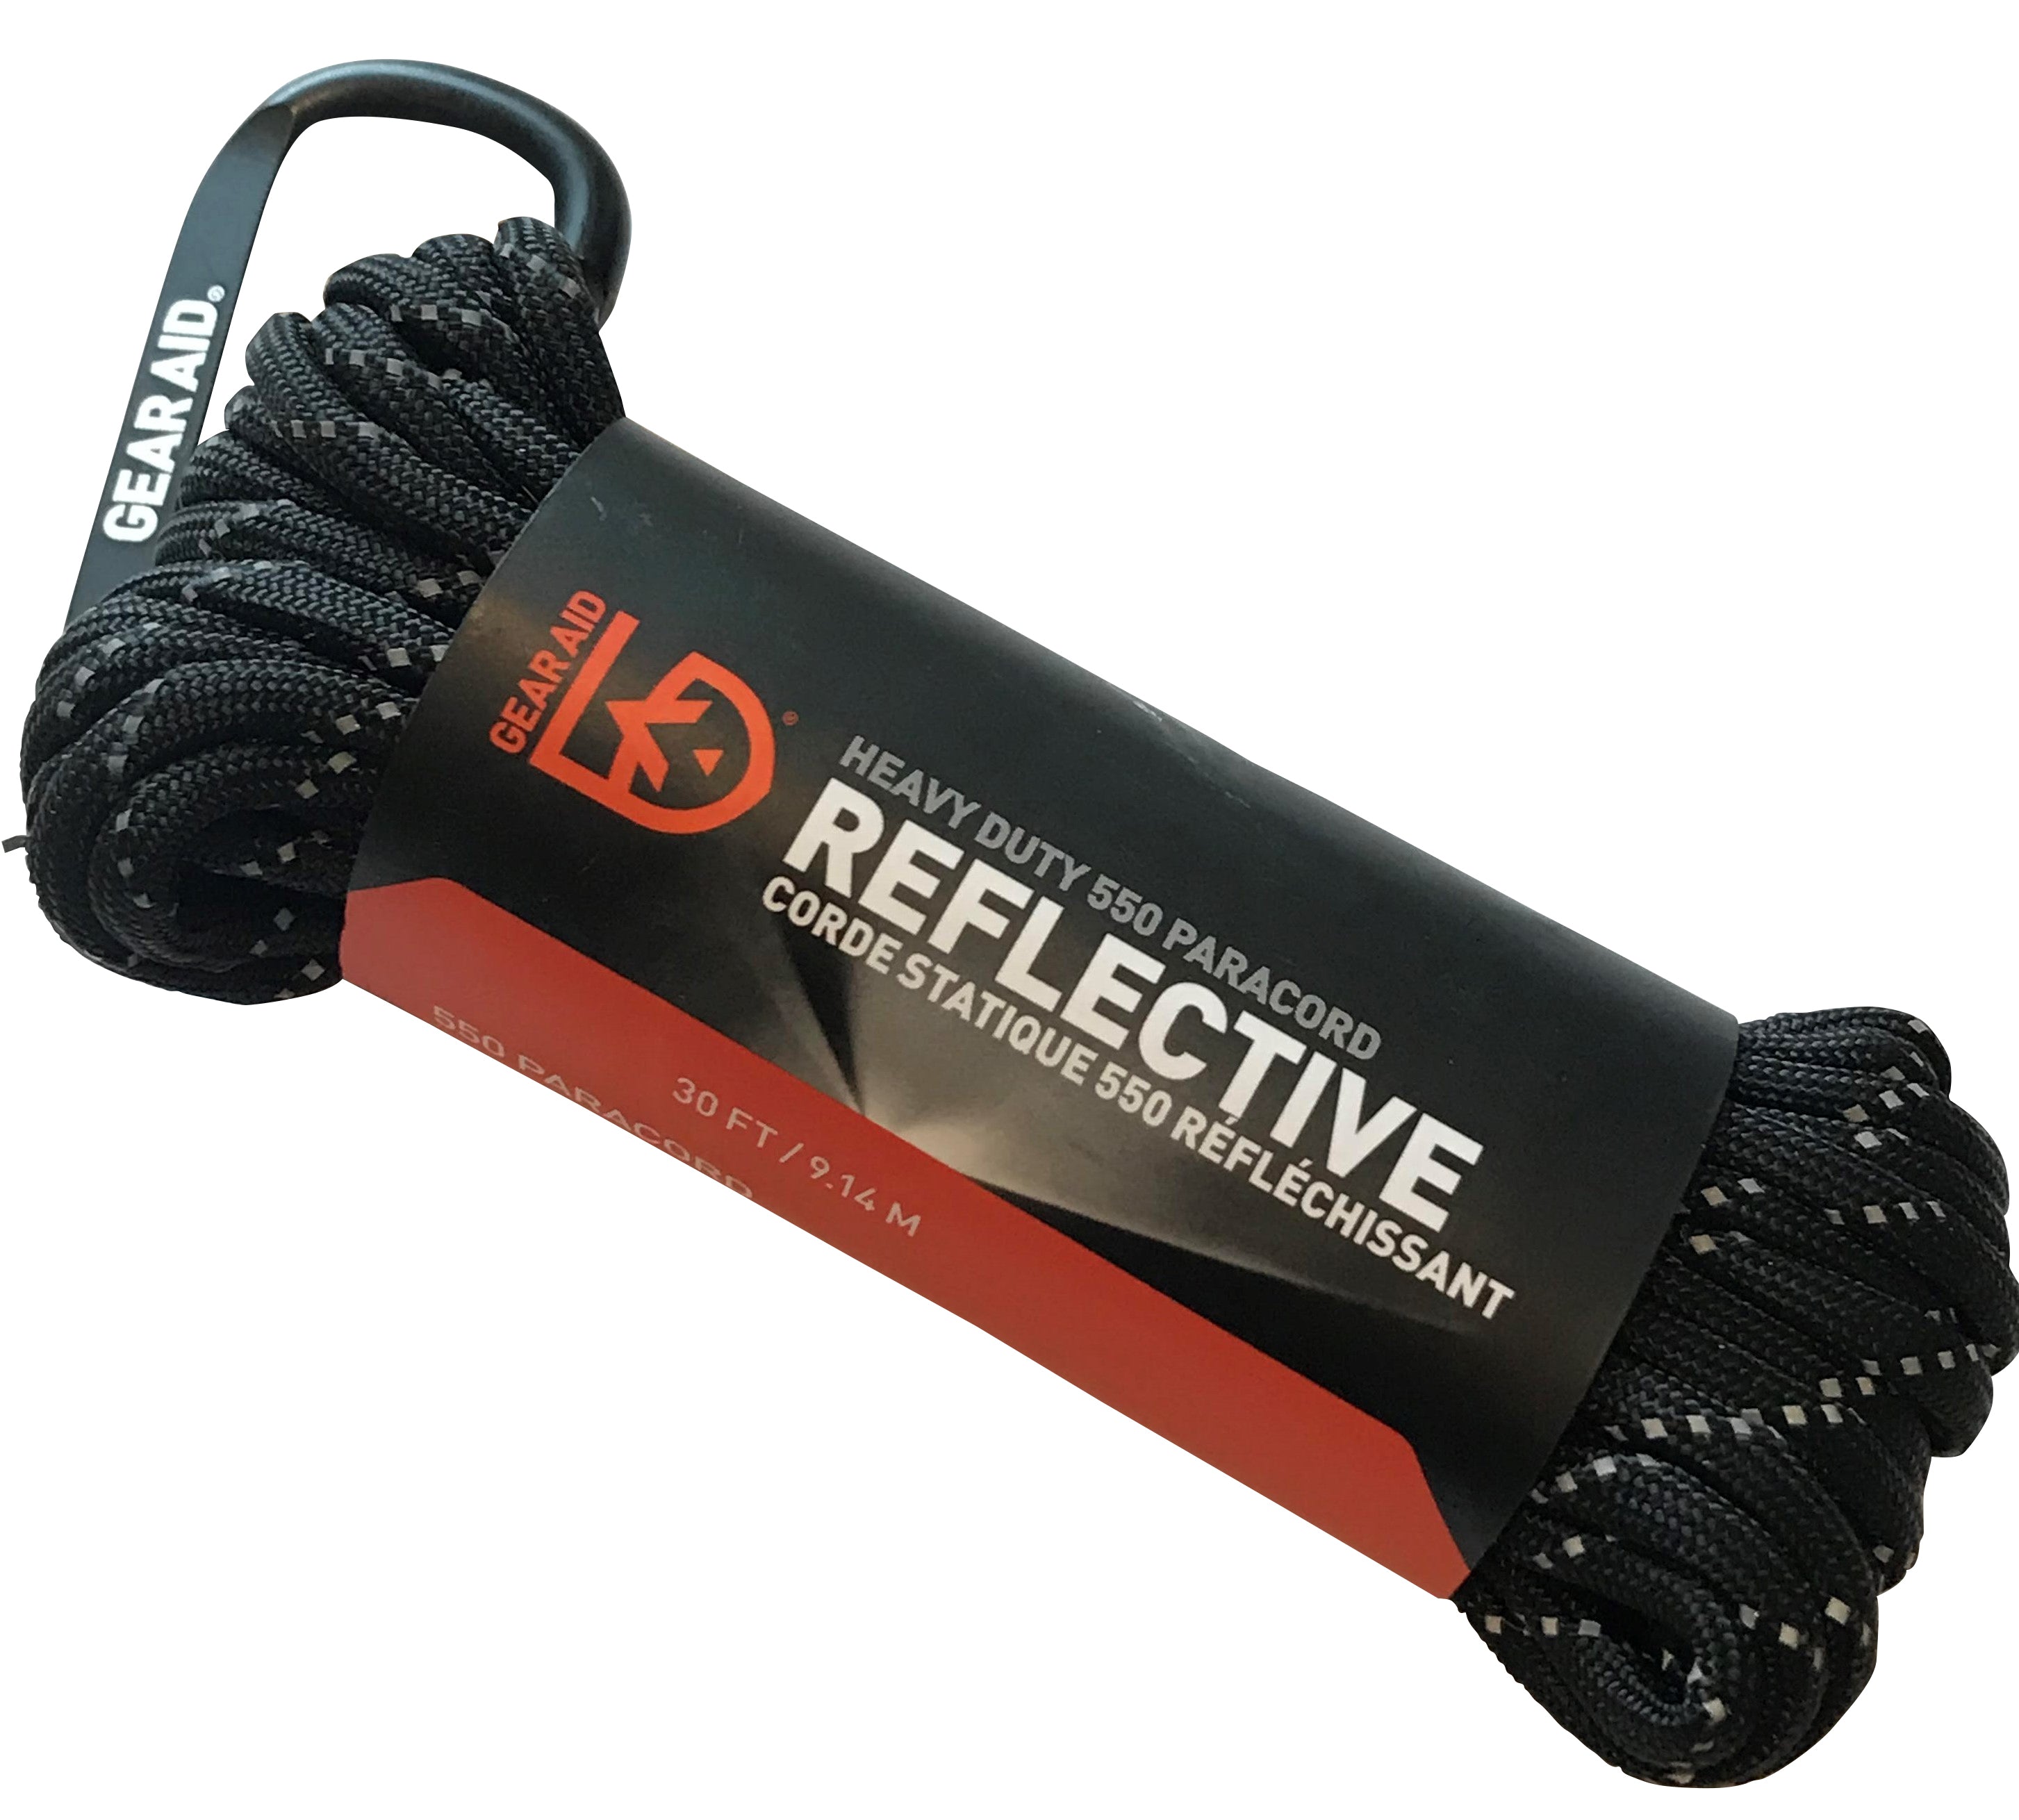 Paracord 30 ft - Gear Aid - reflective cord to hang essentials at camp –  The Camp Life